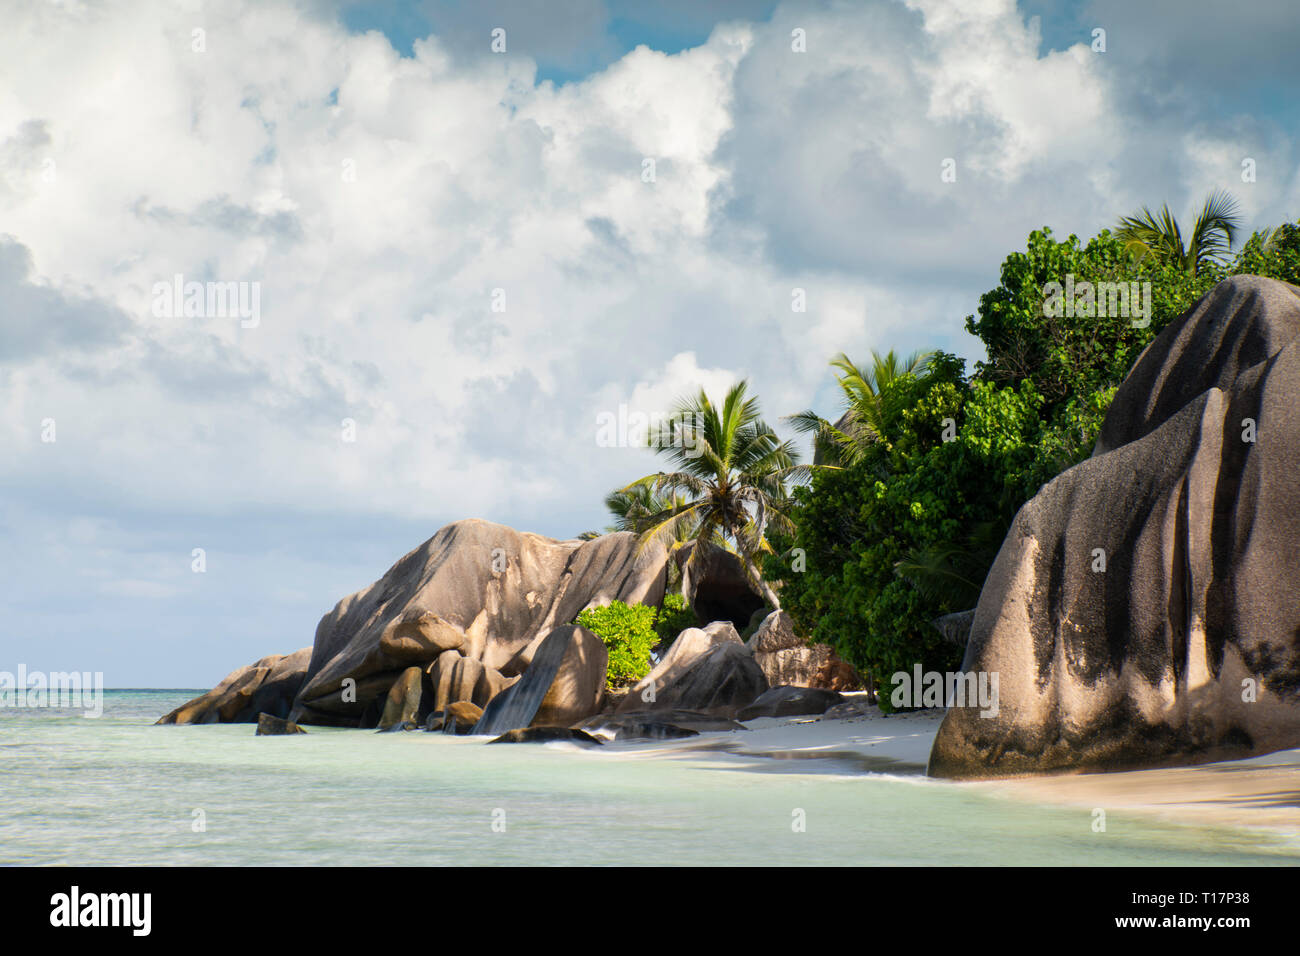 Large granite boulders and palm trees on L’Anse Source d’Argent, La Digue, the Seychelles Stock Photo